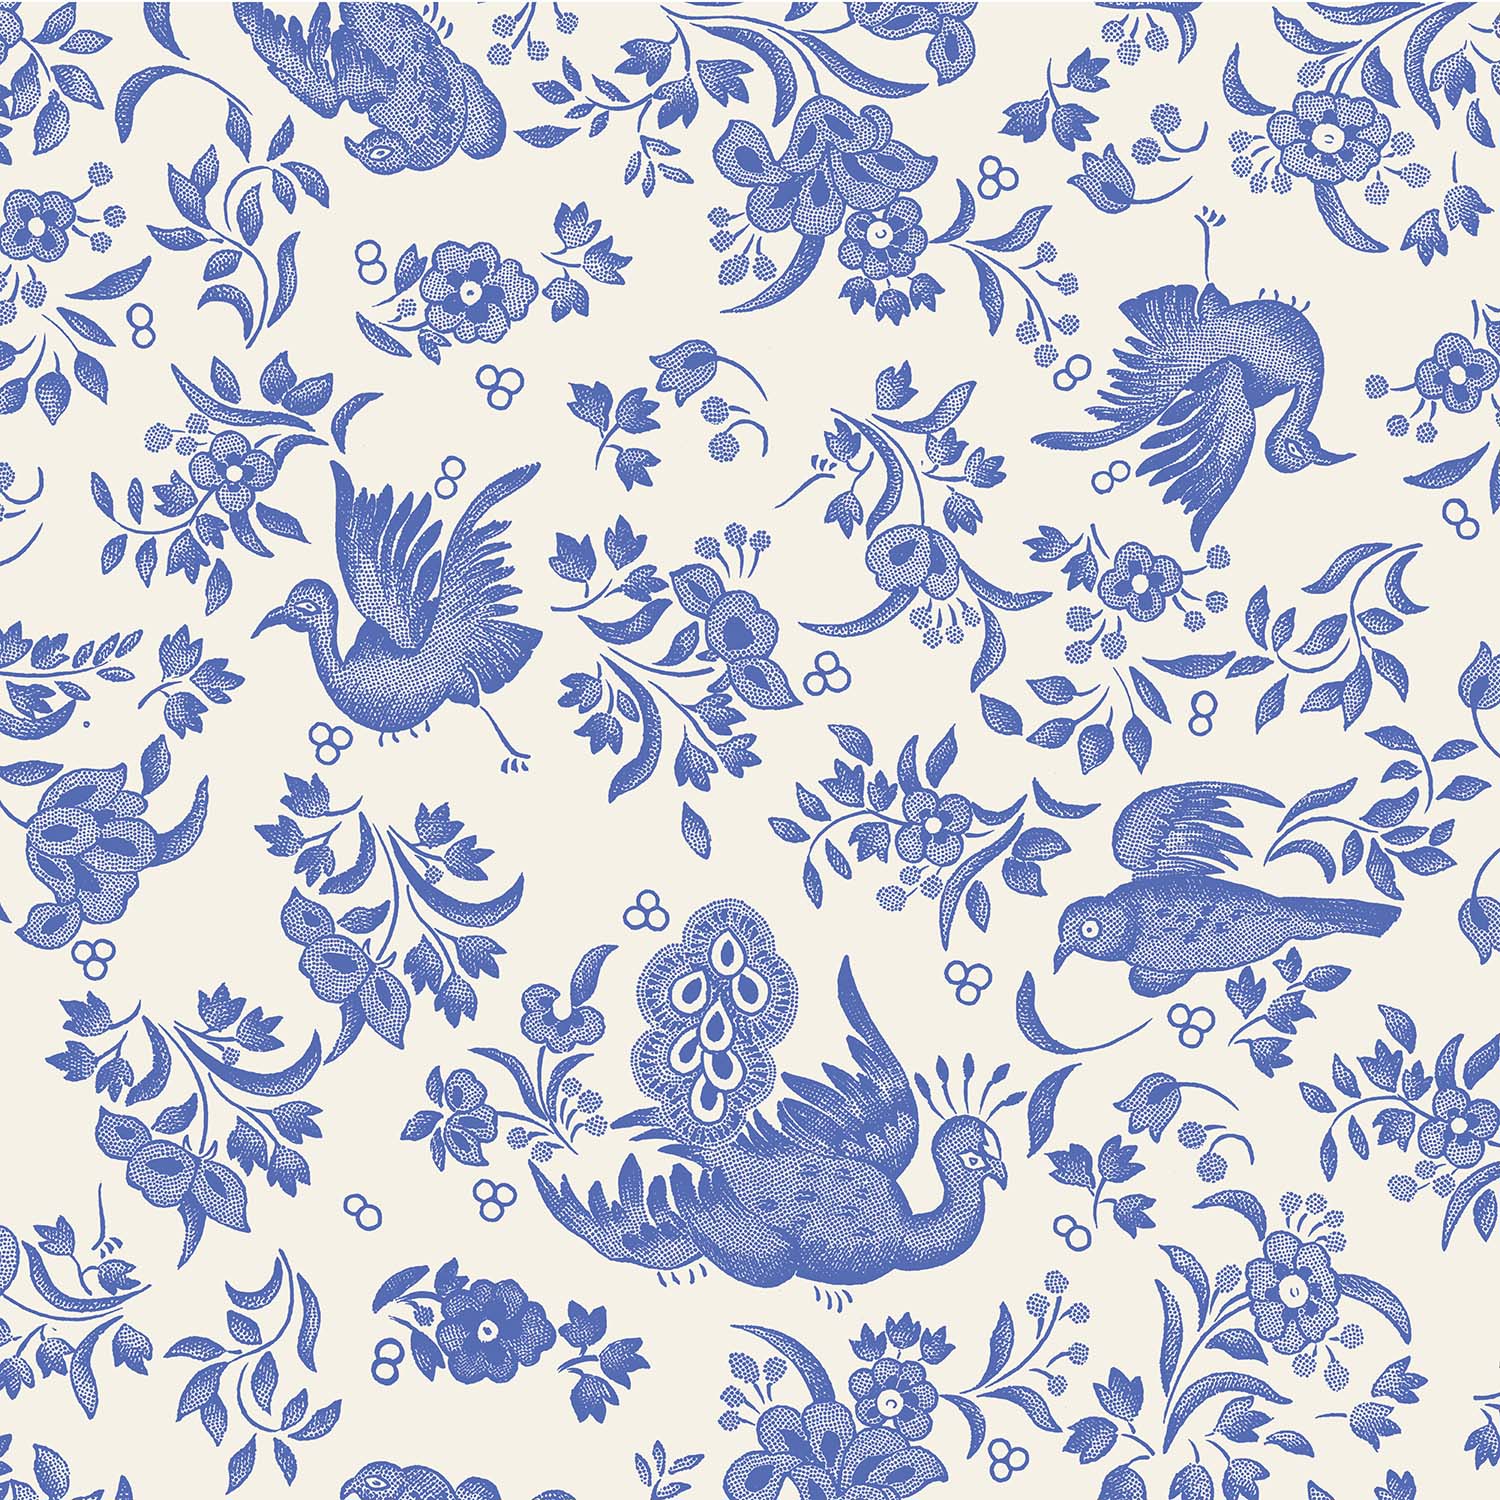 A square cocktail napkin featuring a blue bird and floral pattern on a white background, inspired by the ornamental bird pattern from Burleigh.